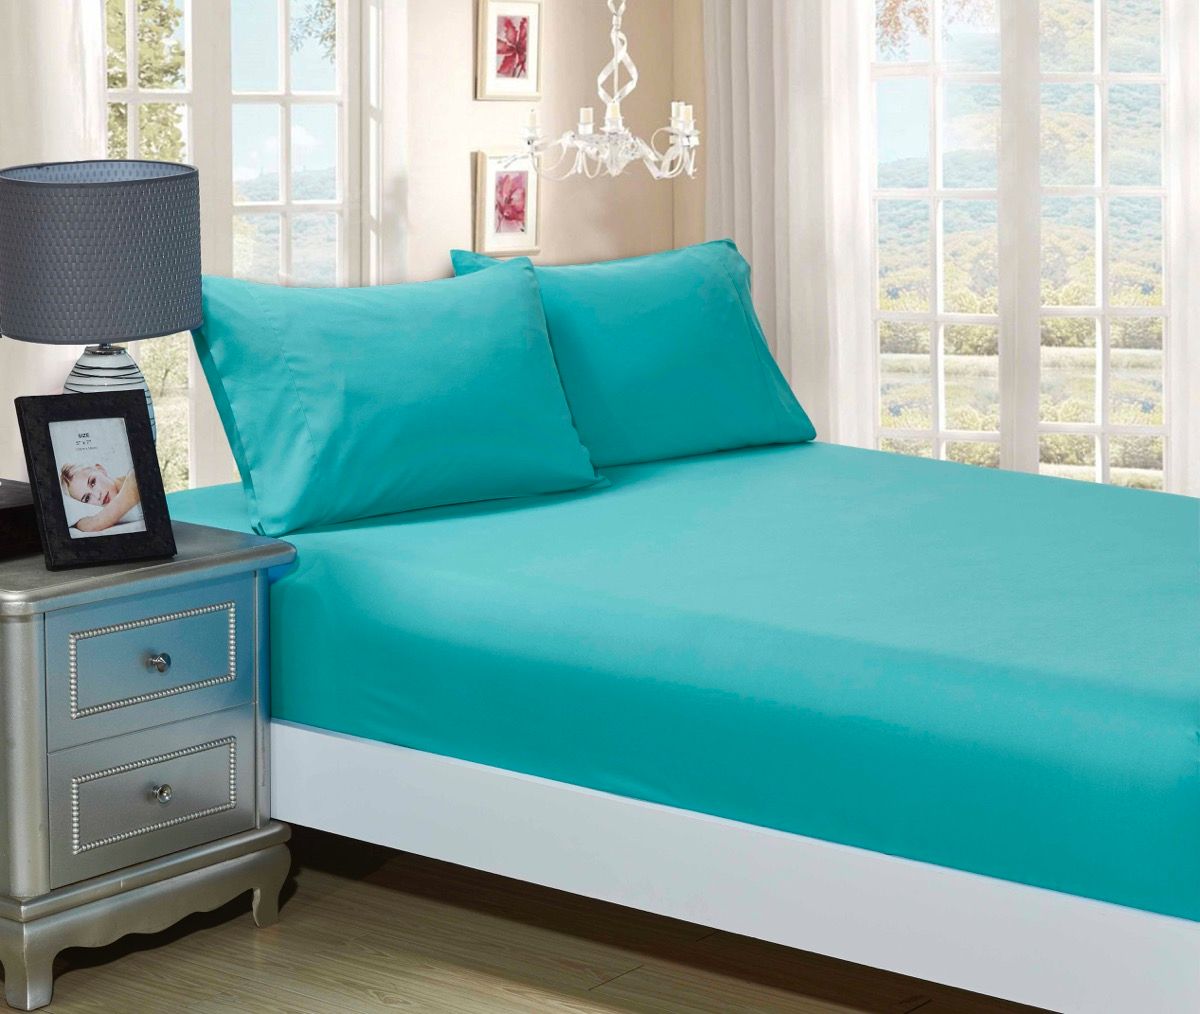 Super Soft 3-Piece King Size Bed Fitted Sheet & 2 Pillowcases Set - Teal